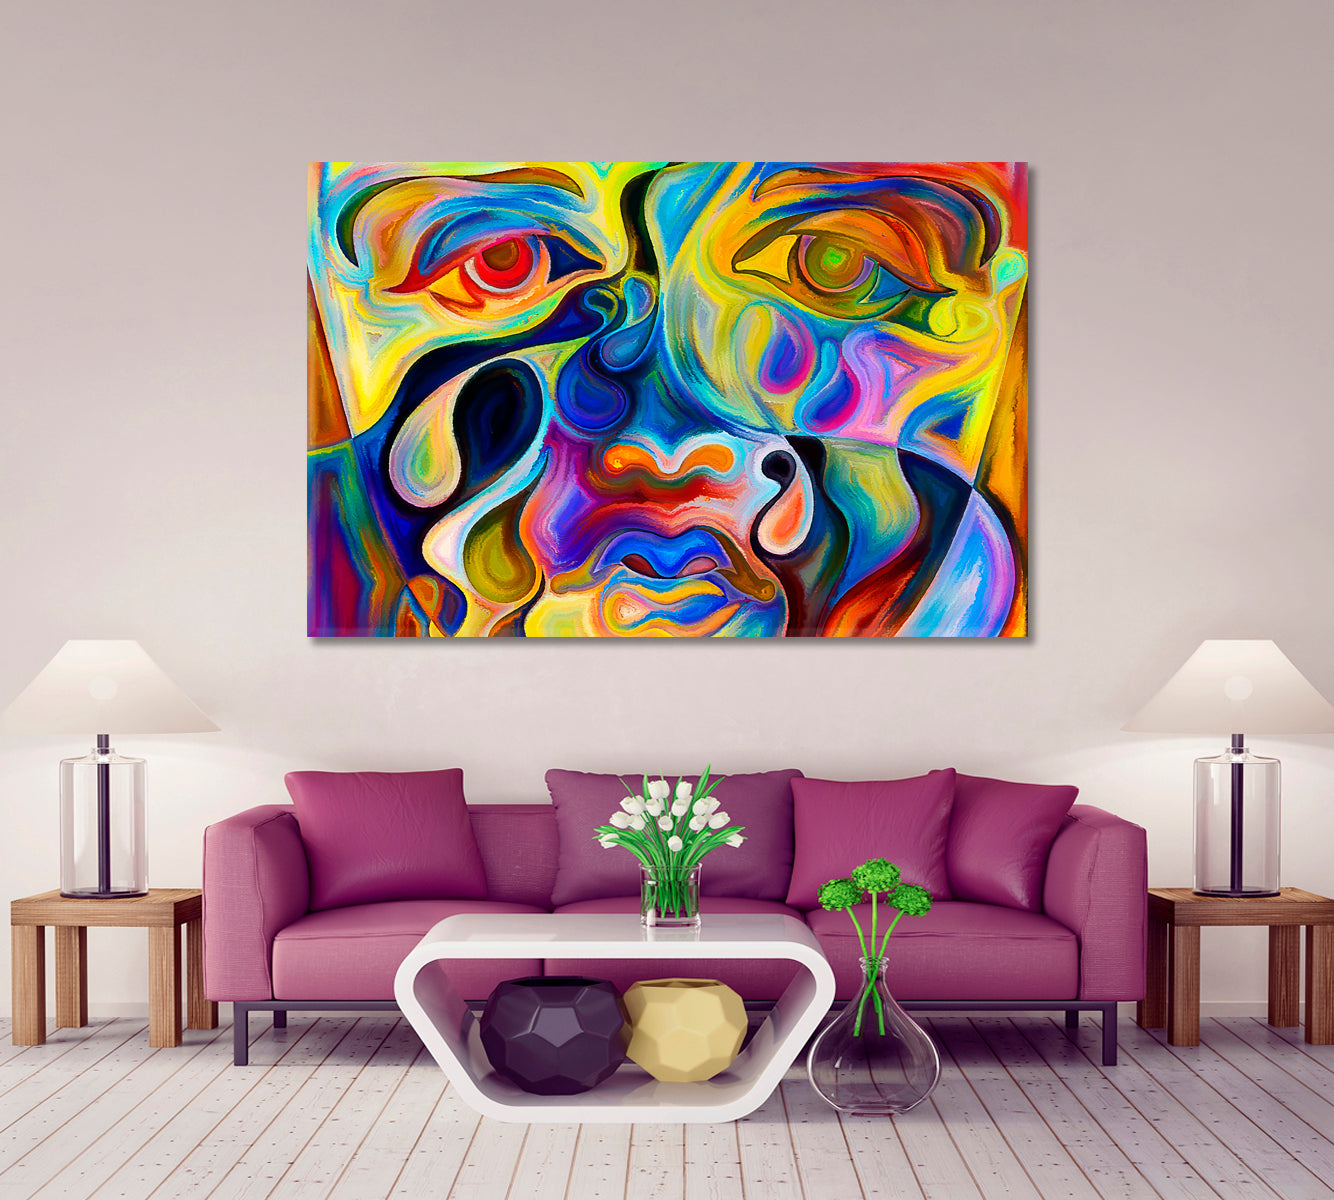 Colors Mood Face and Paint Abstract Design Abstract Art Print Artesty 1 panel 24" x 16" 